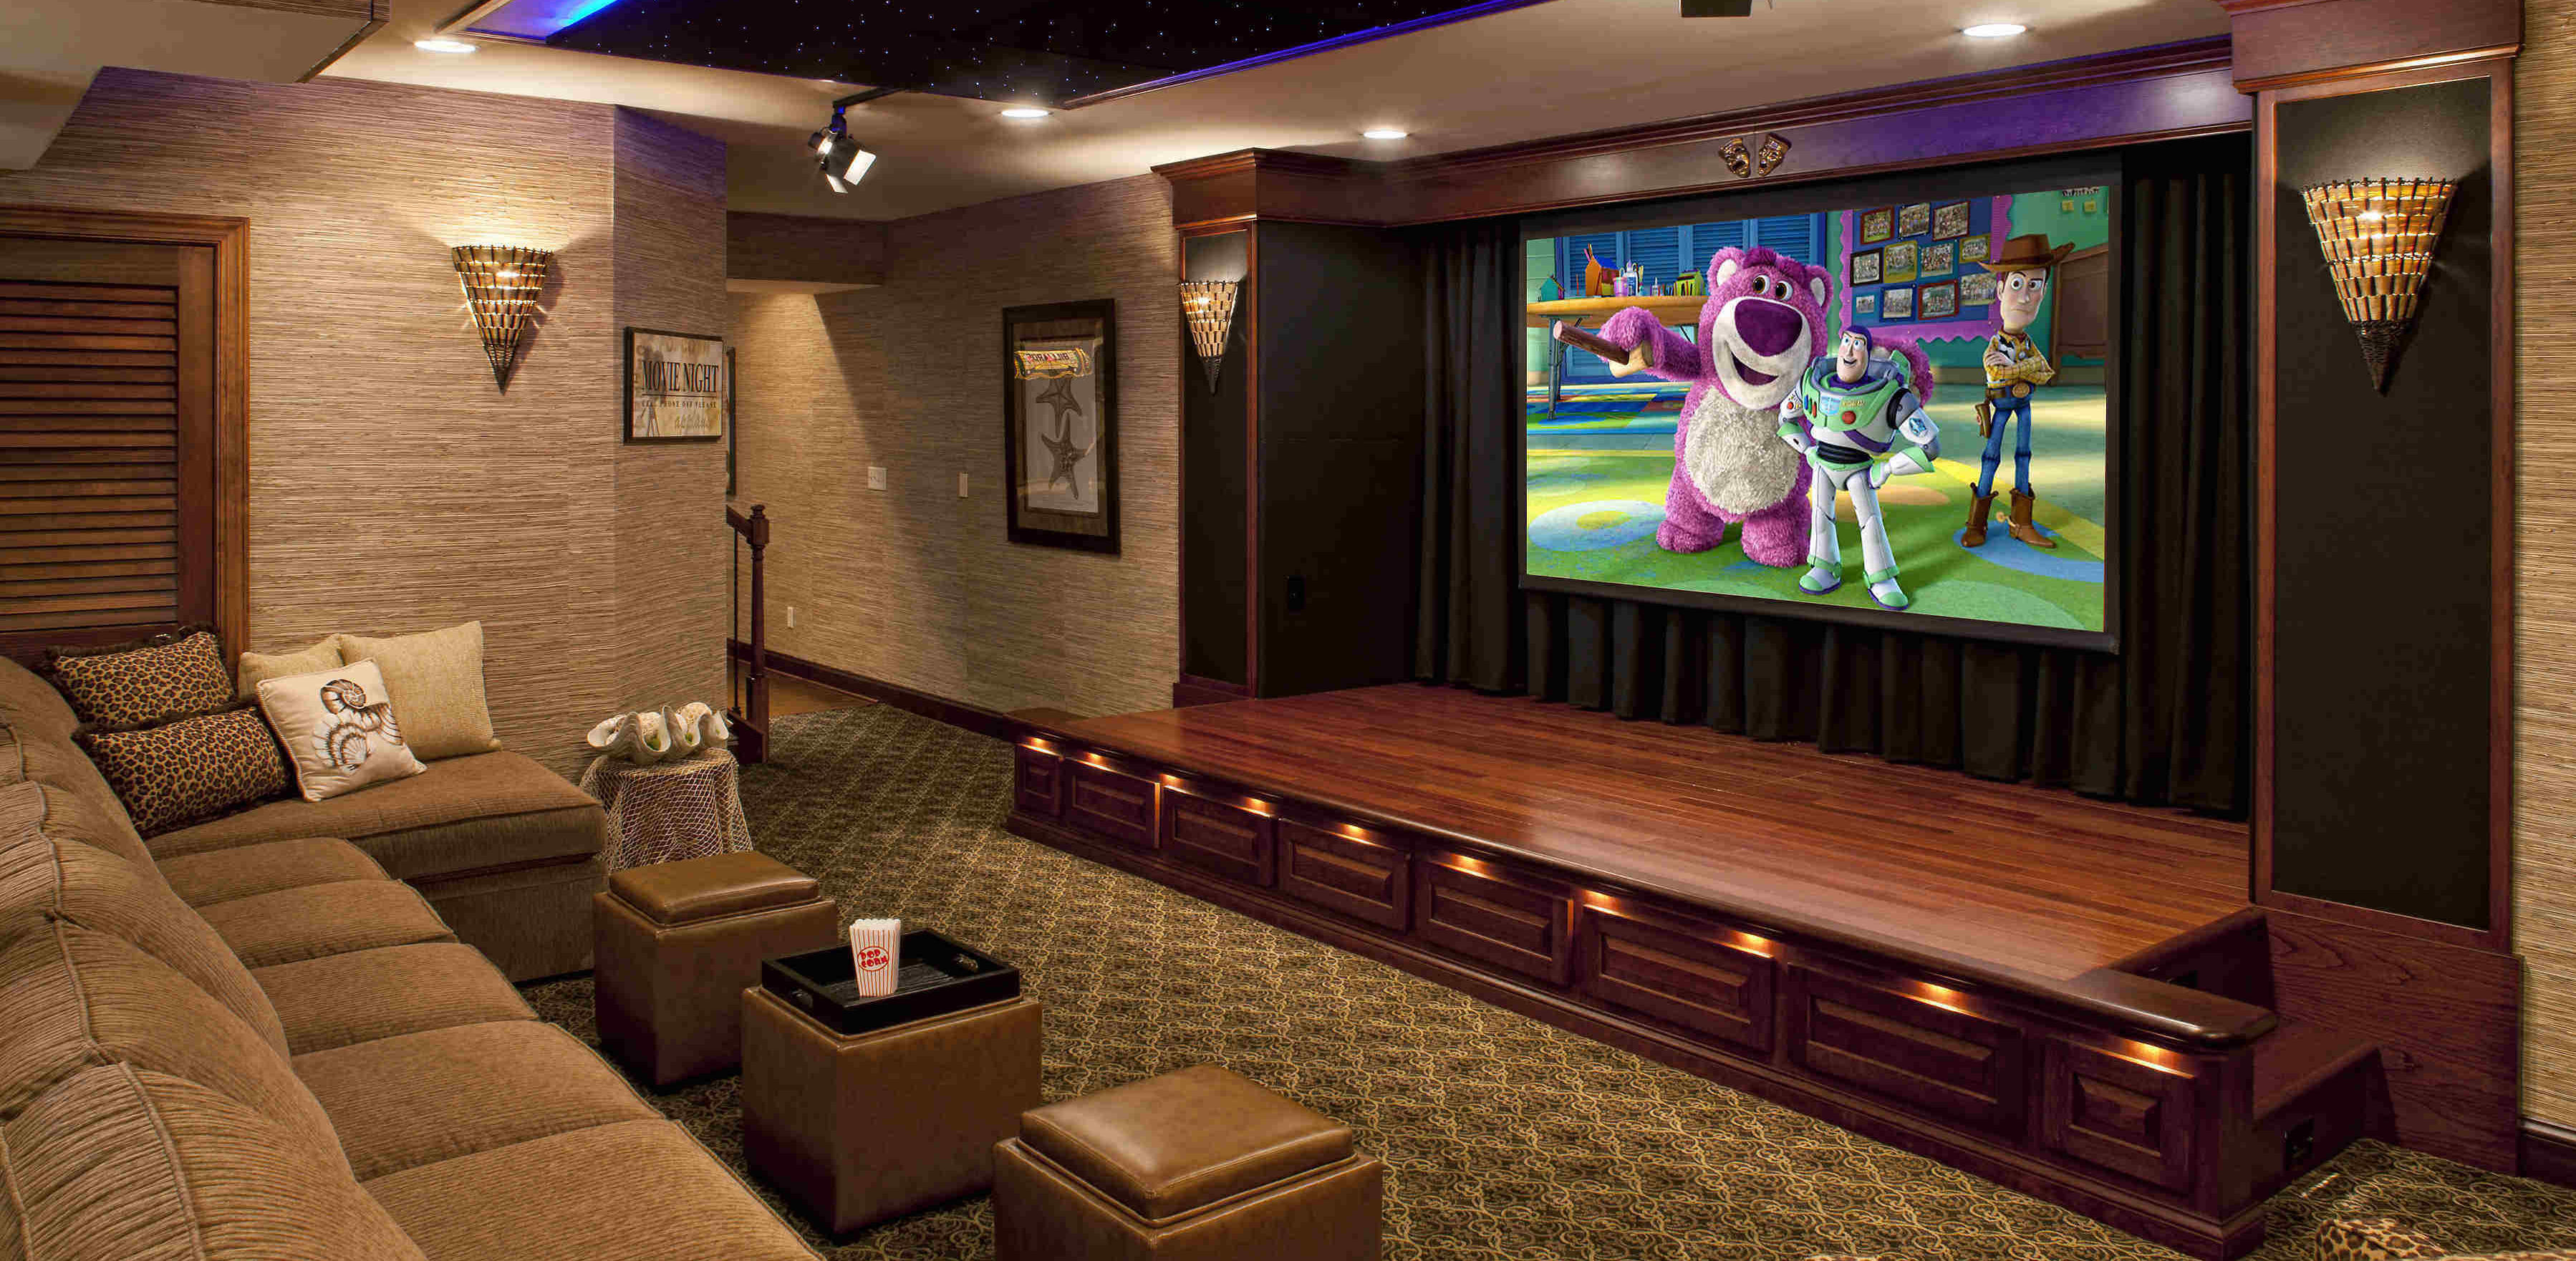 Home Theater Installation Cost Guide and Useful Tips